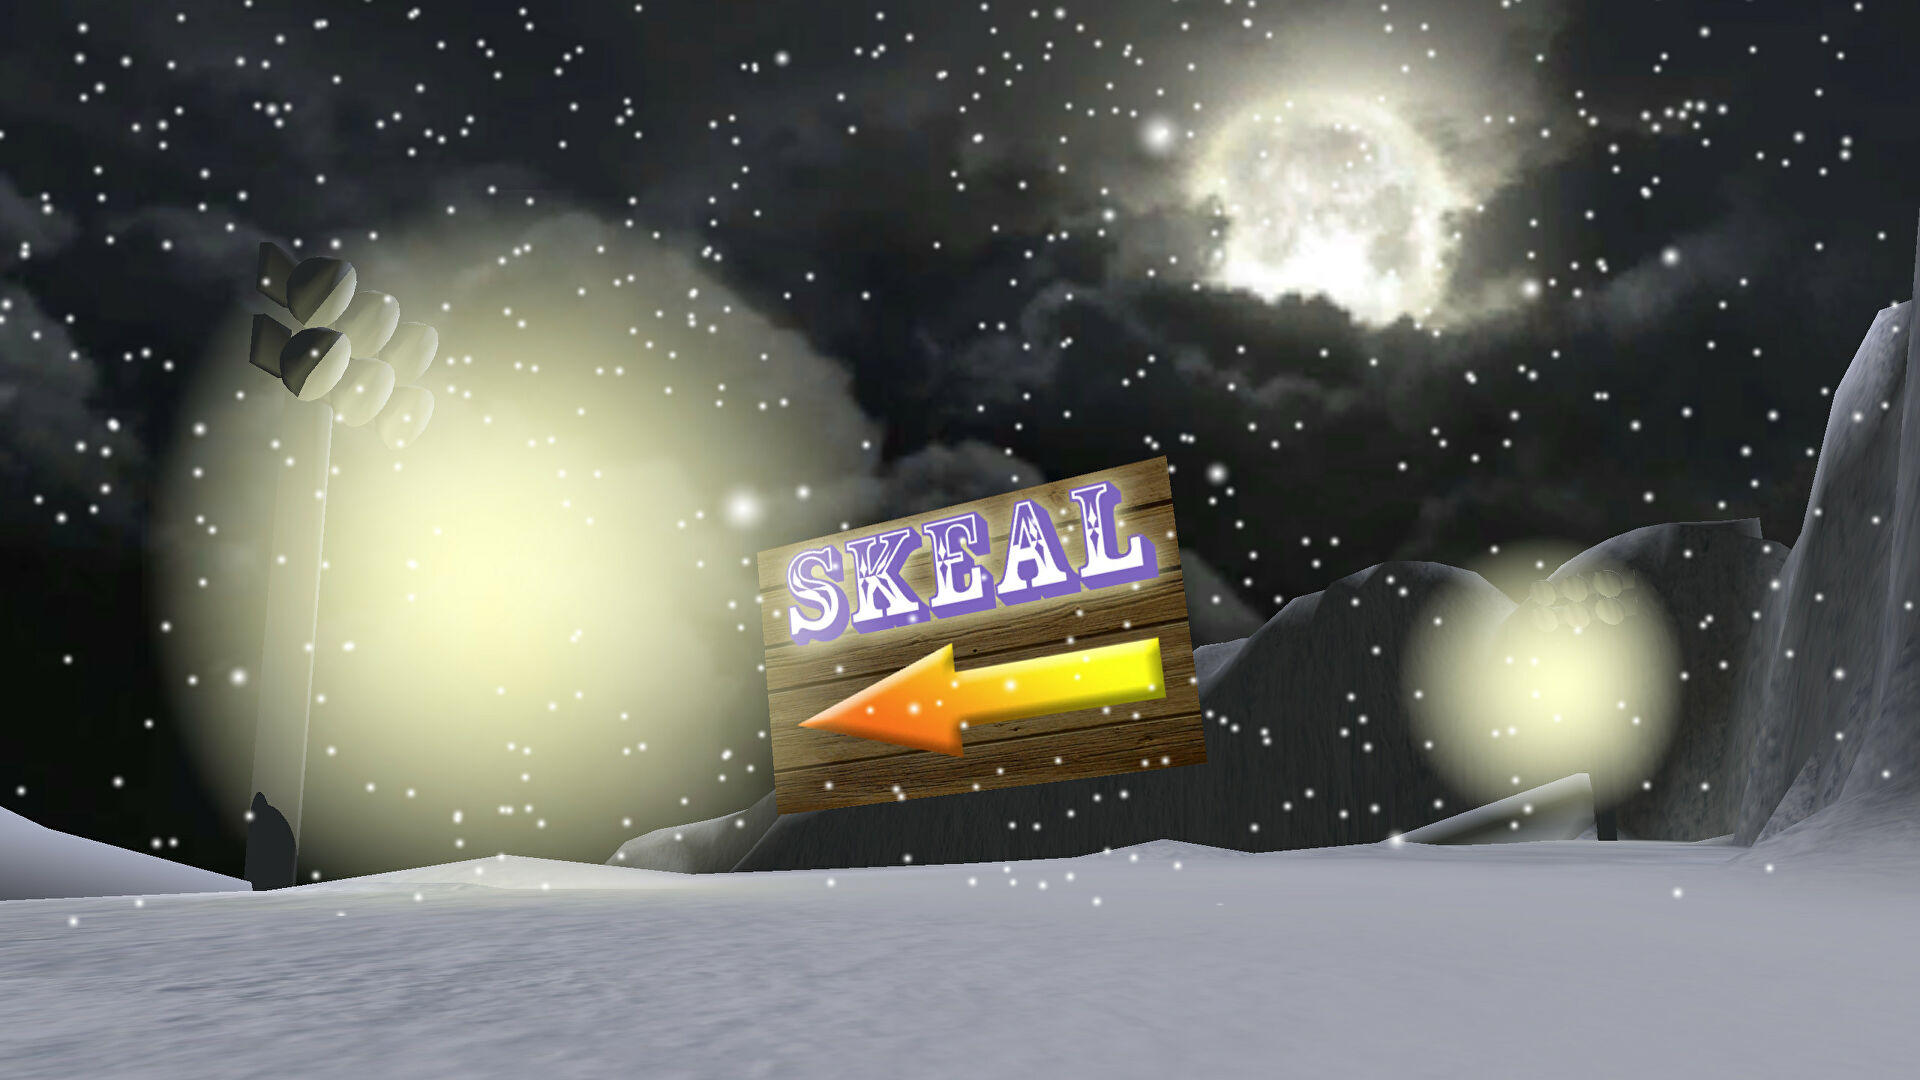 Skeal reflects the power, pleasure, and pain of all our Christmasses